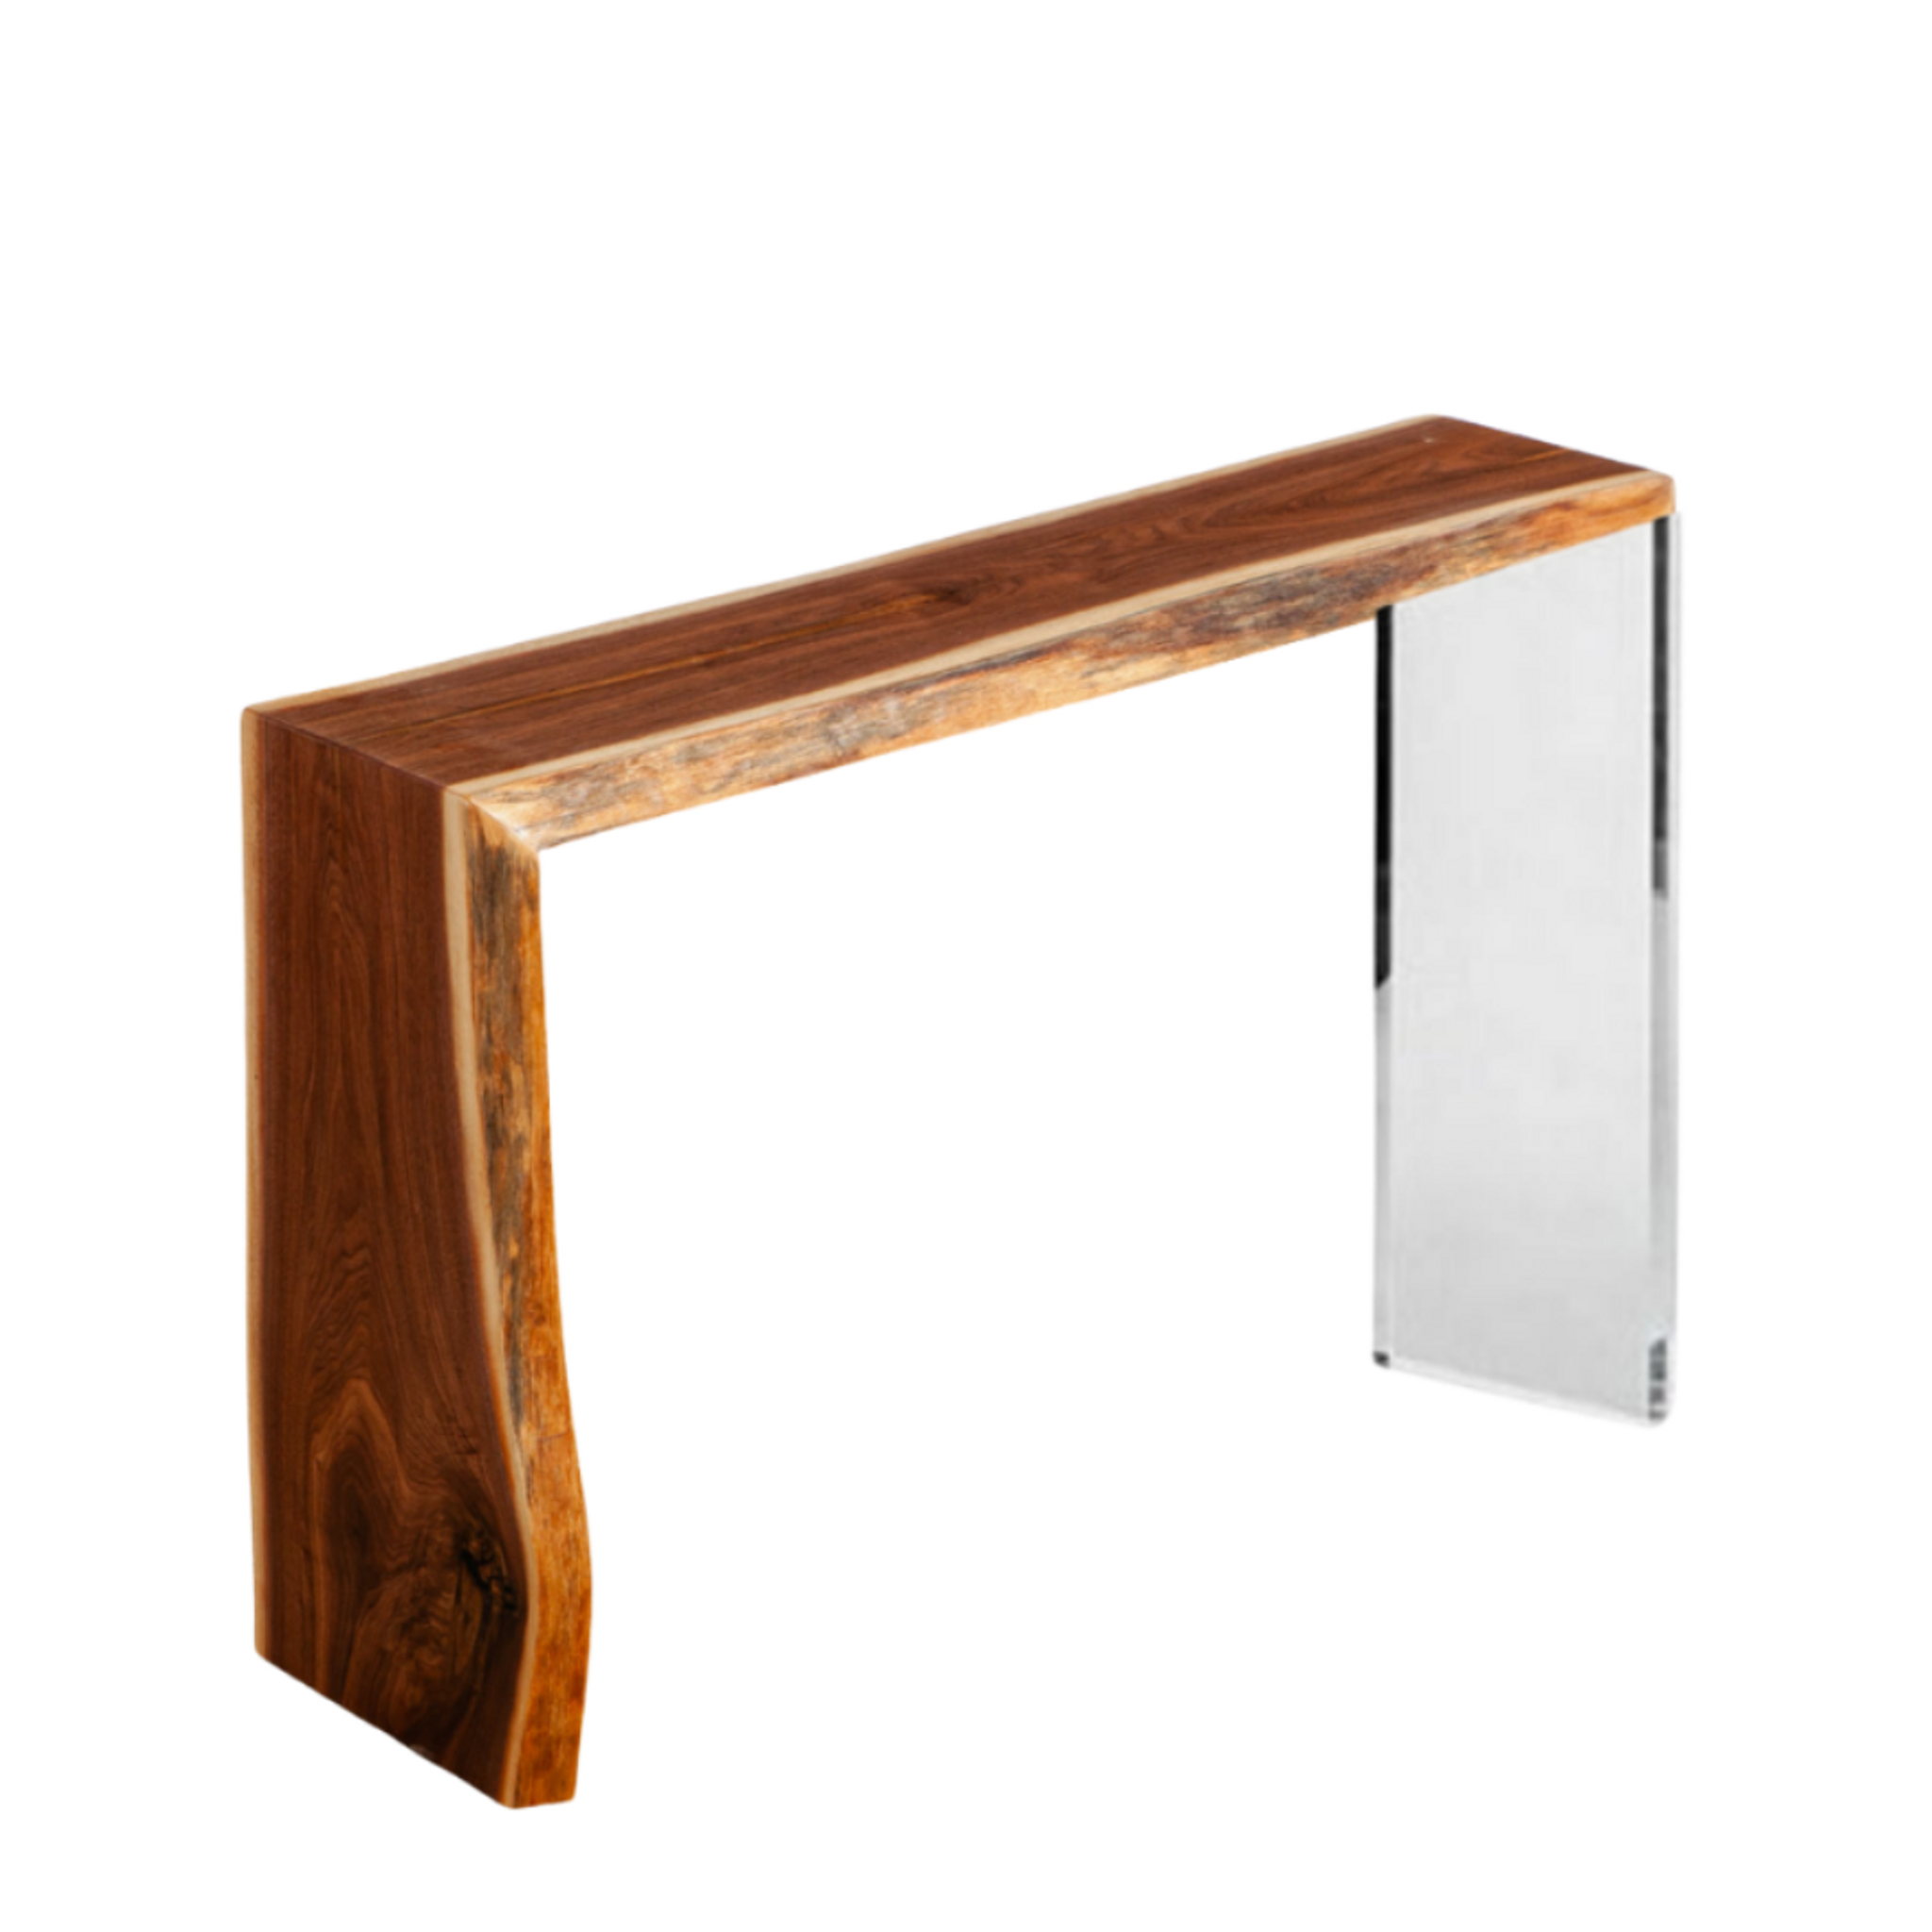 Live Edge Walnut Waterfall Console Table with Lucite Leg